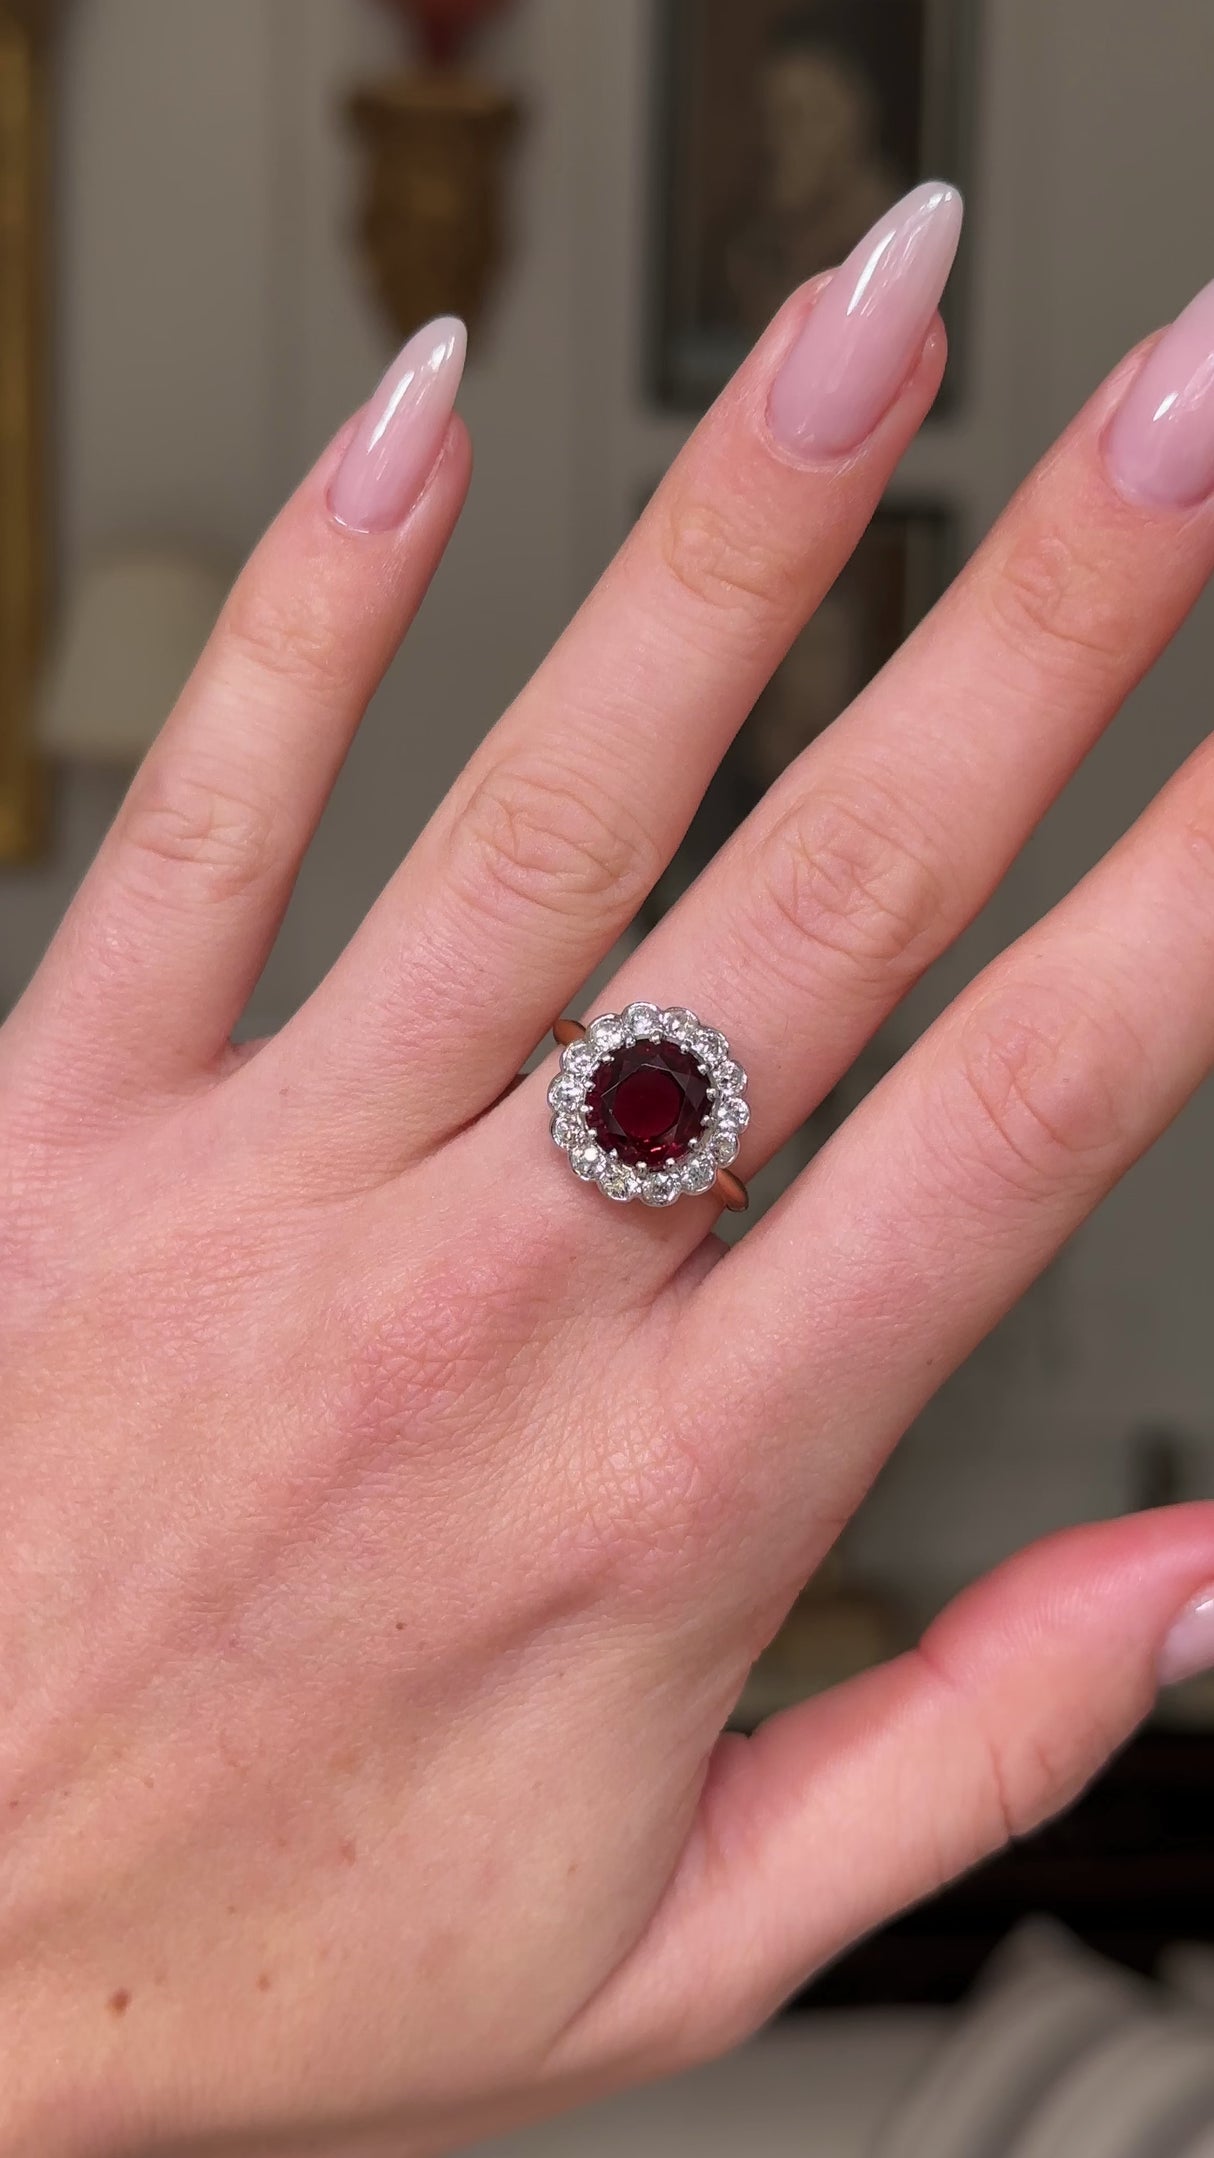 Edwardian garnet and diamond cluster ring, worn on hand and moved away from camera to give perspective.